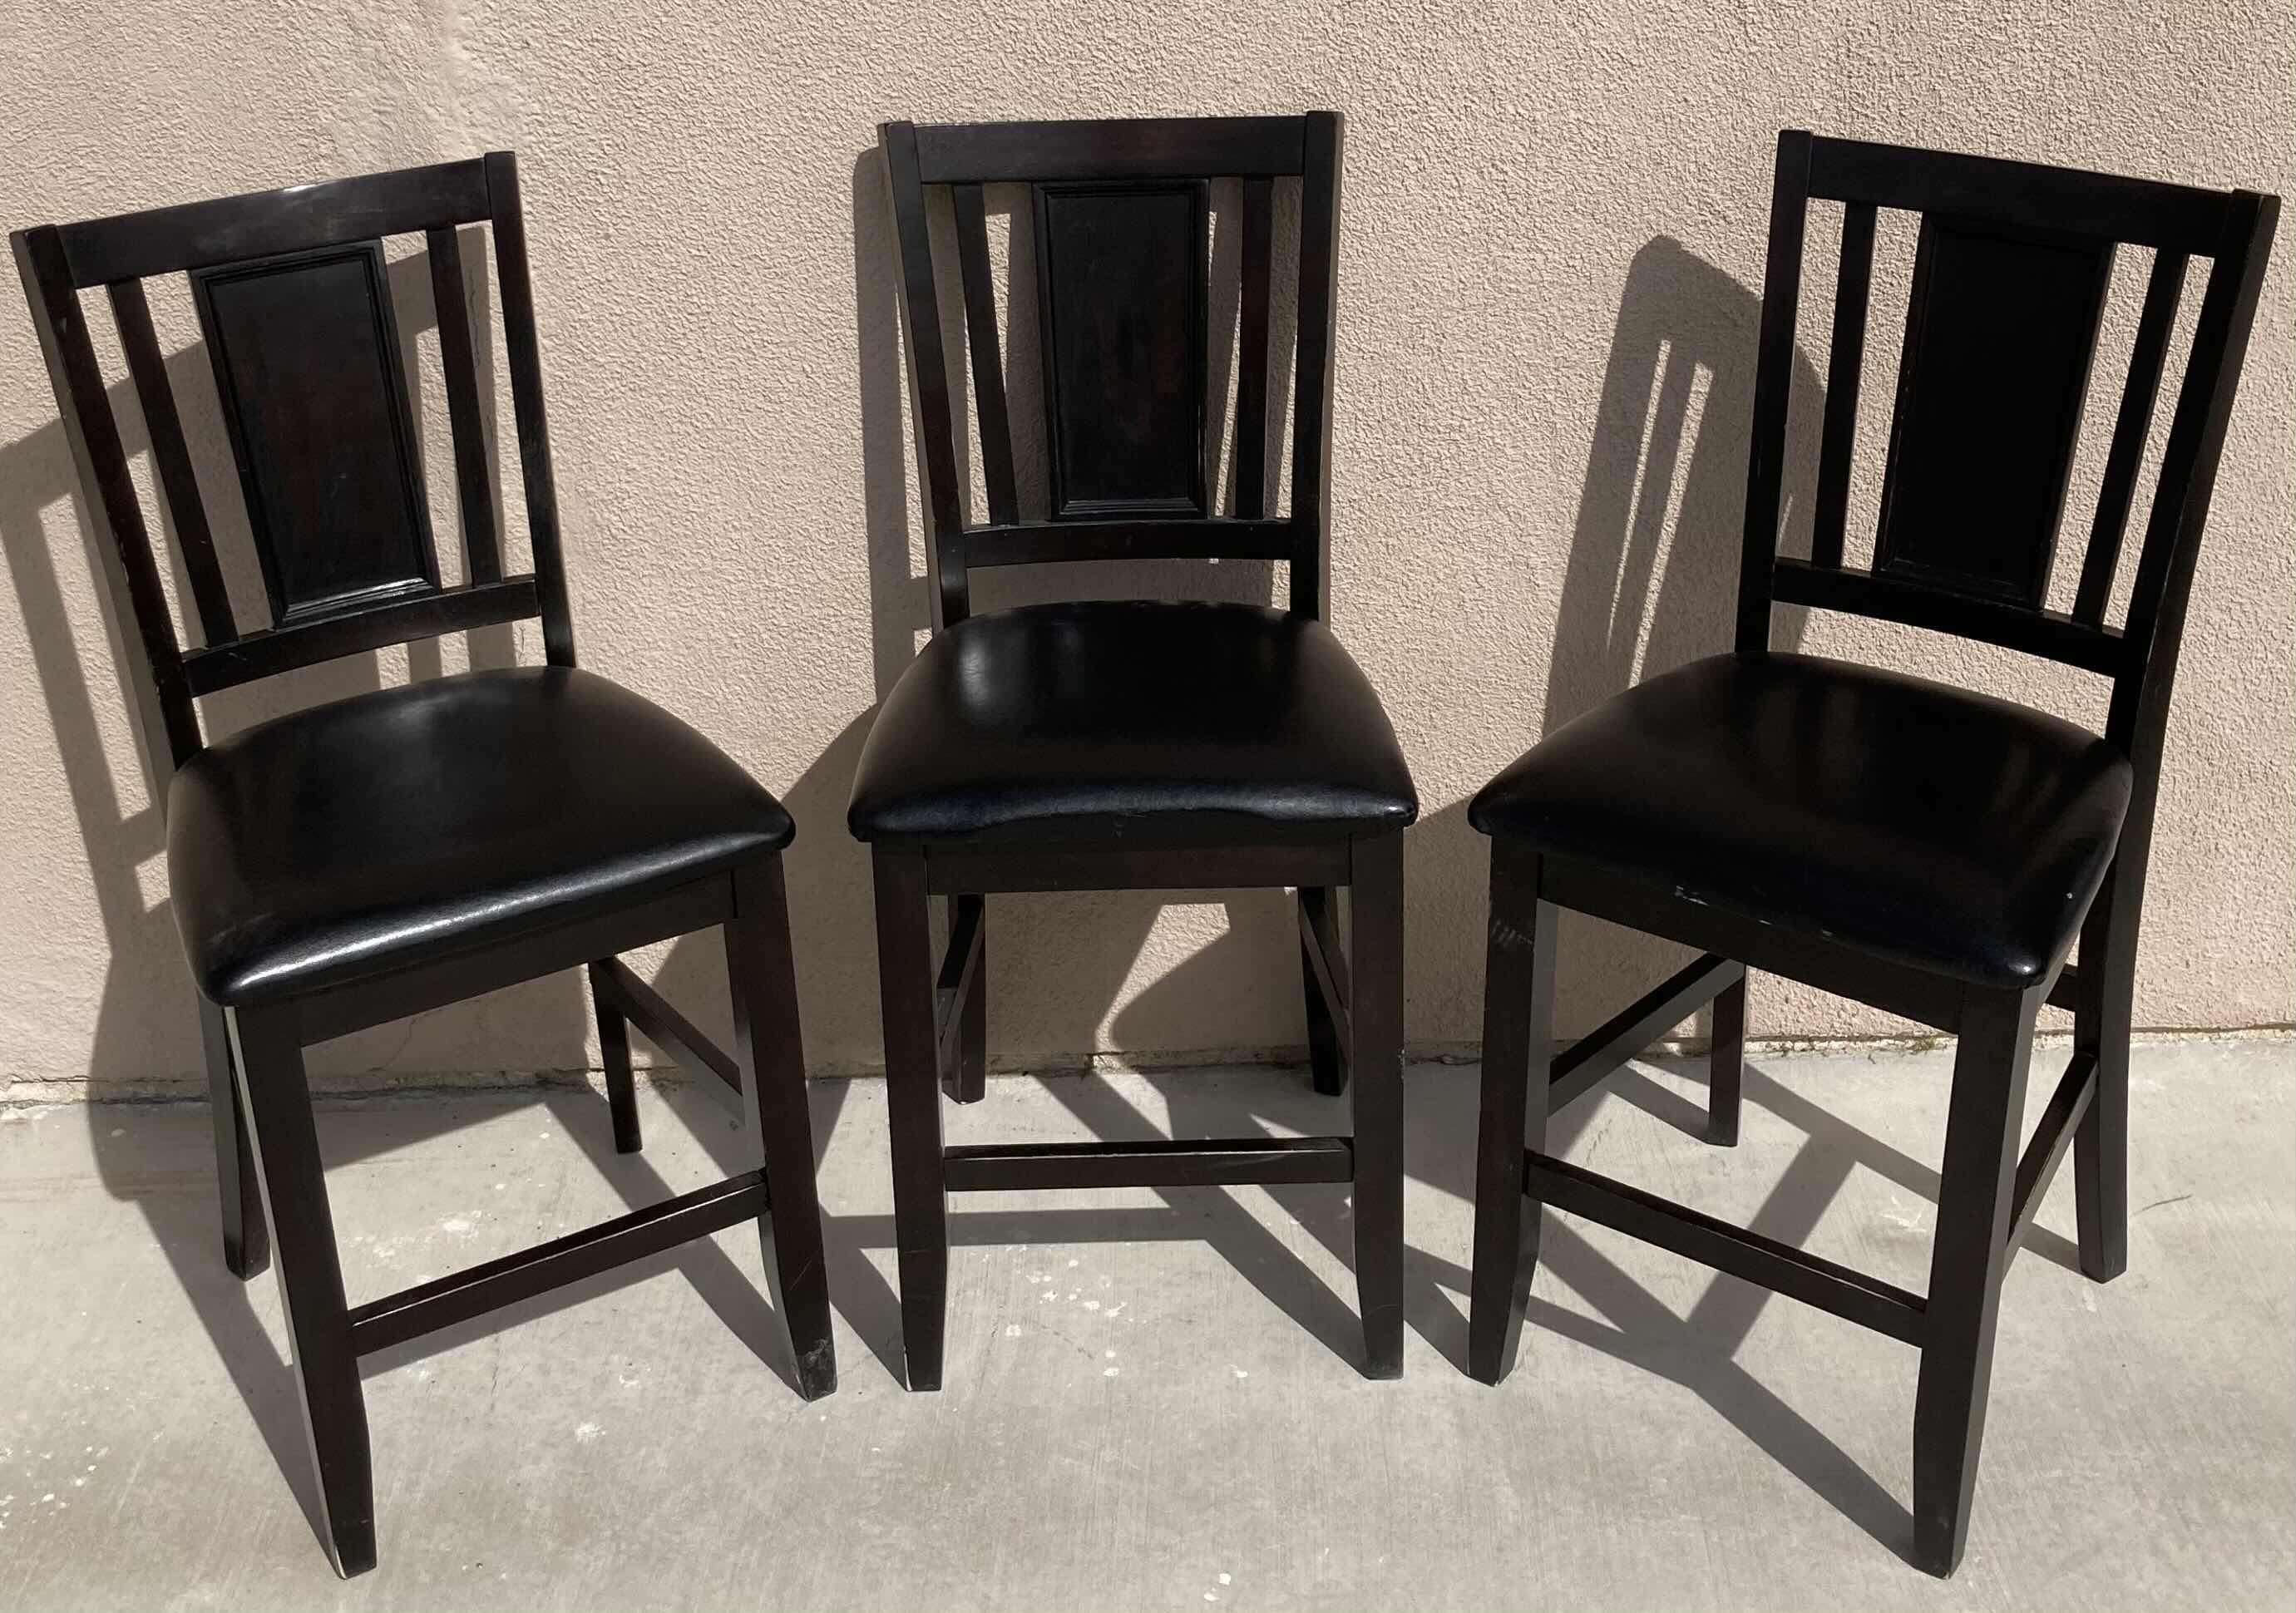 Photo 2 of ASHLEY FURNITURE CARLYLE COLLECTION BLACK WOOD FINISH BAR STOOLS SET OF 3 19” X 17” H40”